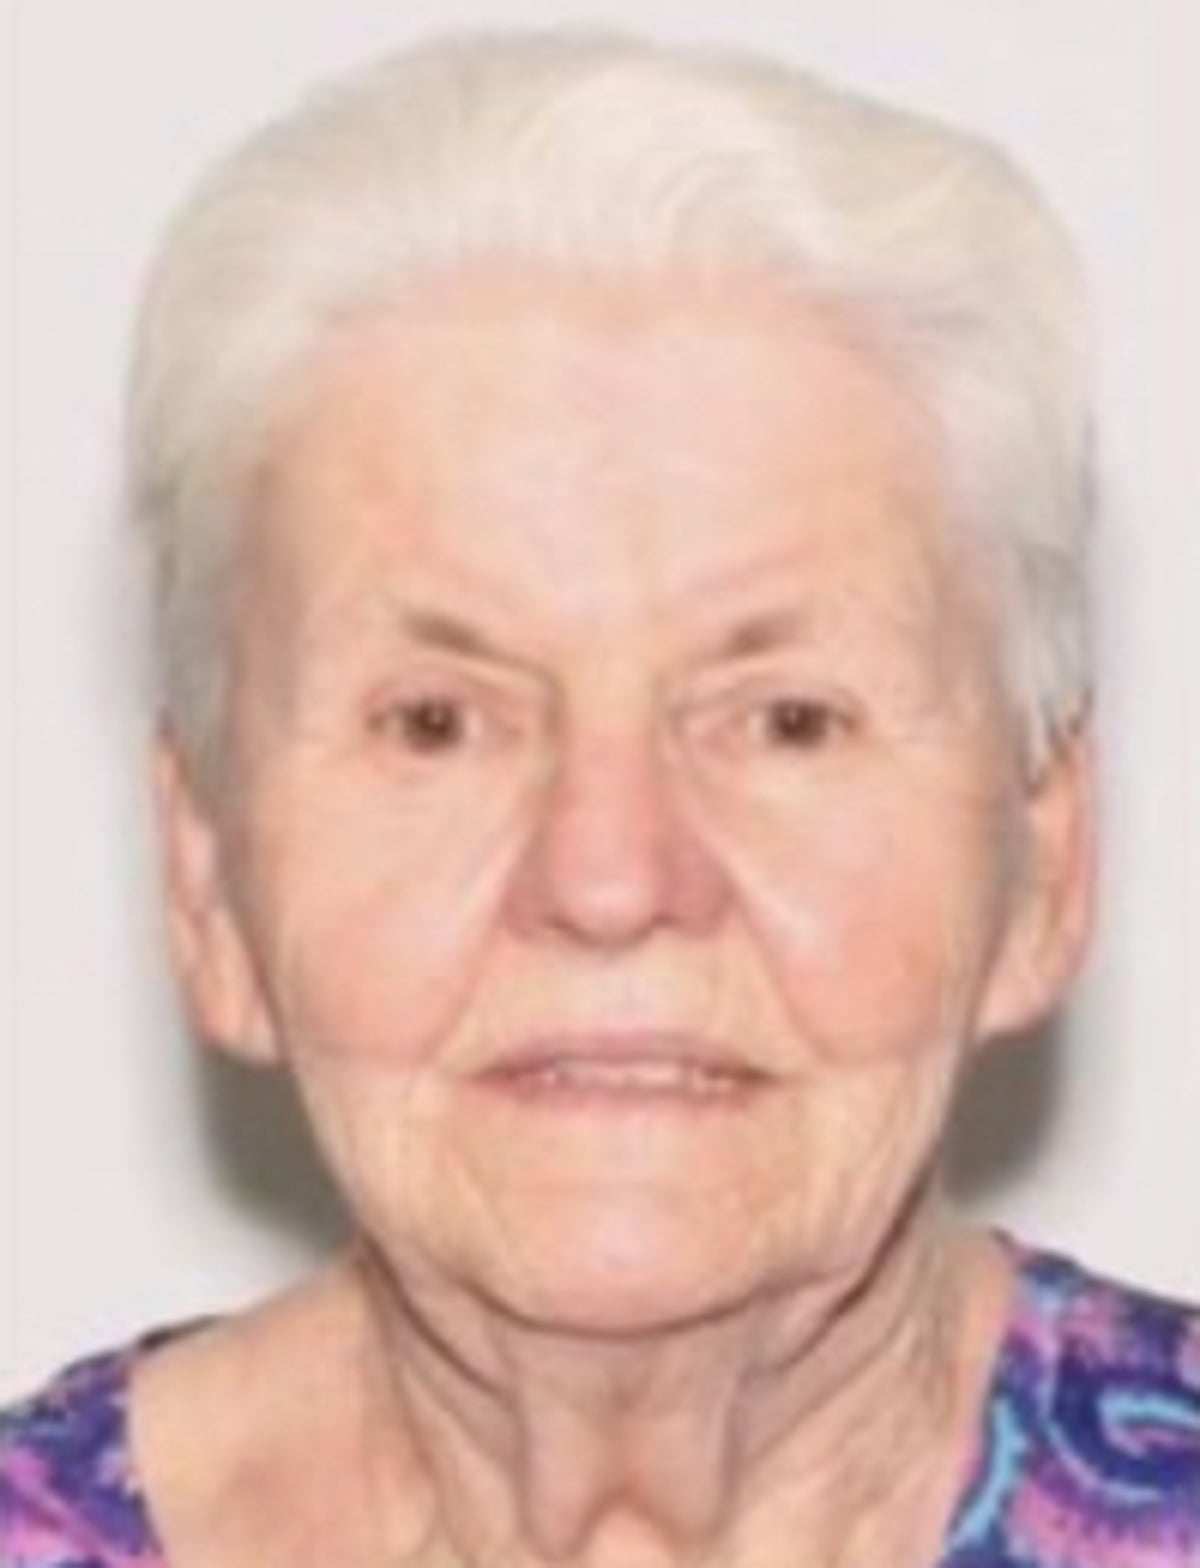 Missing elderly woman with dementia is found dead in Florida woods